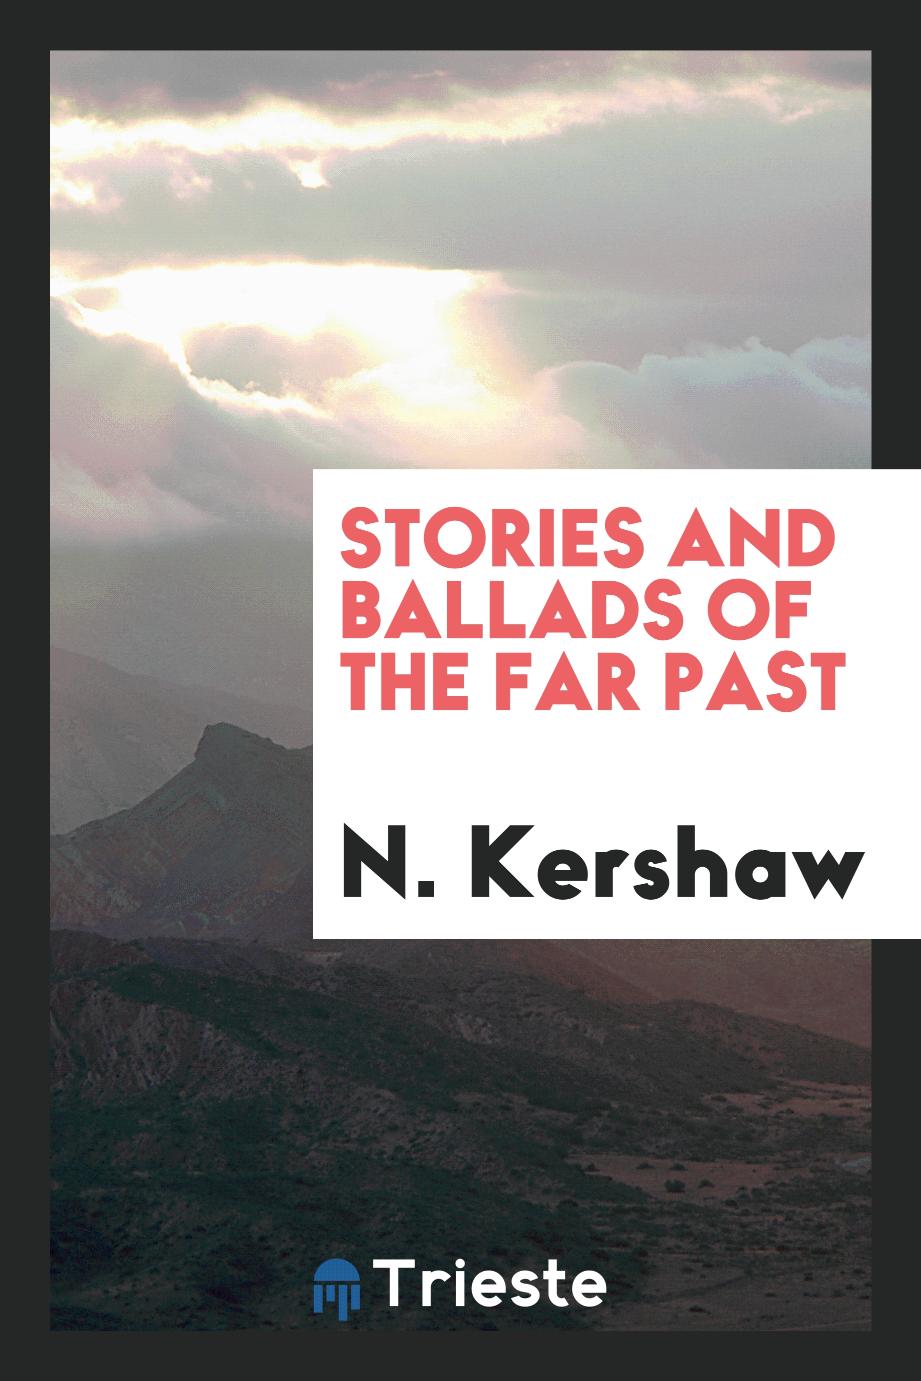 Stories and ballads of the far past